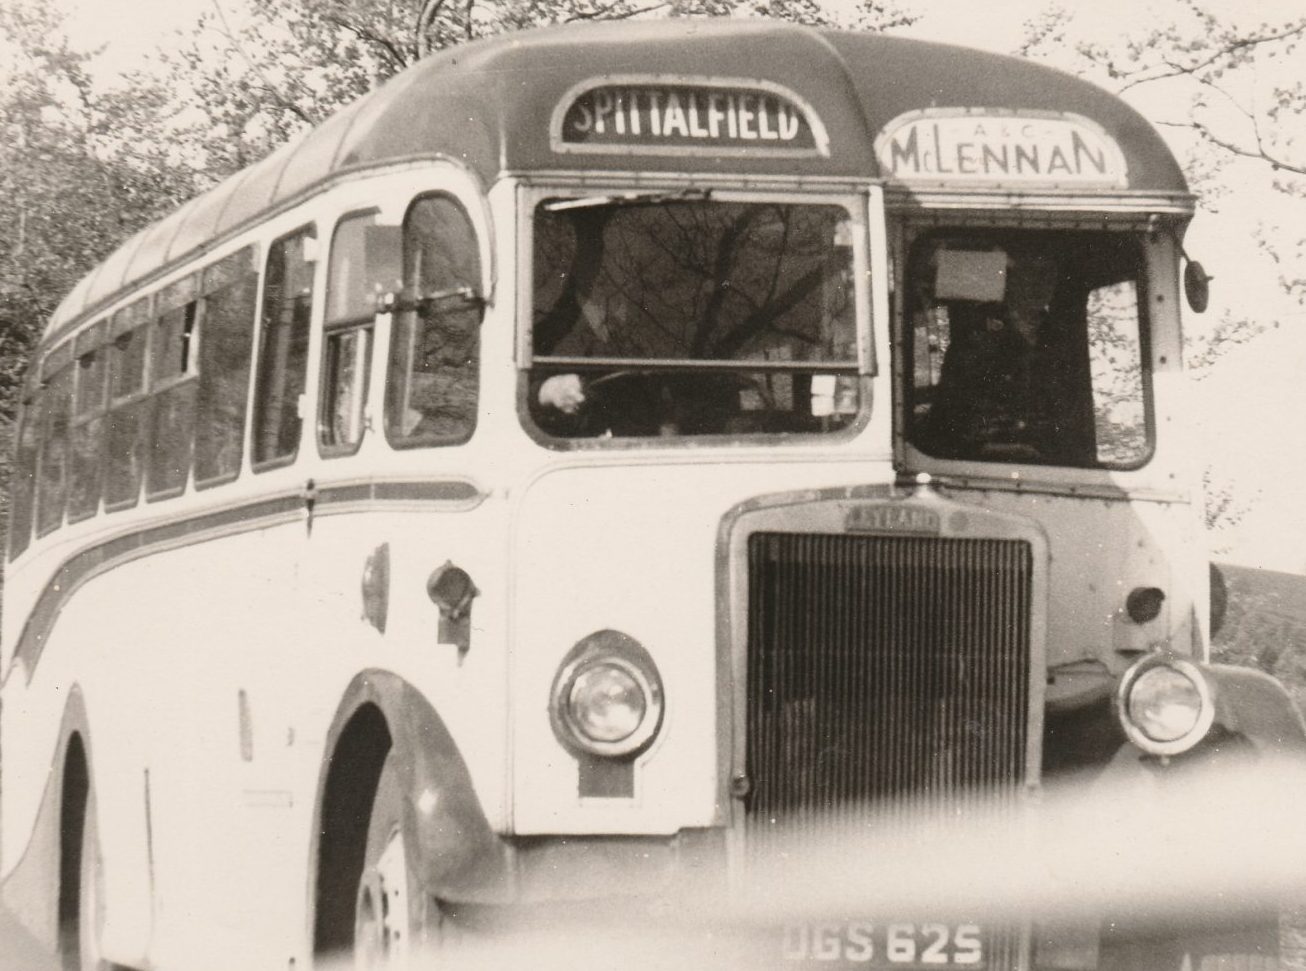 A single-decker bus at Spittalfield in the 1970s